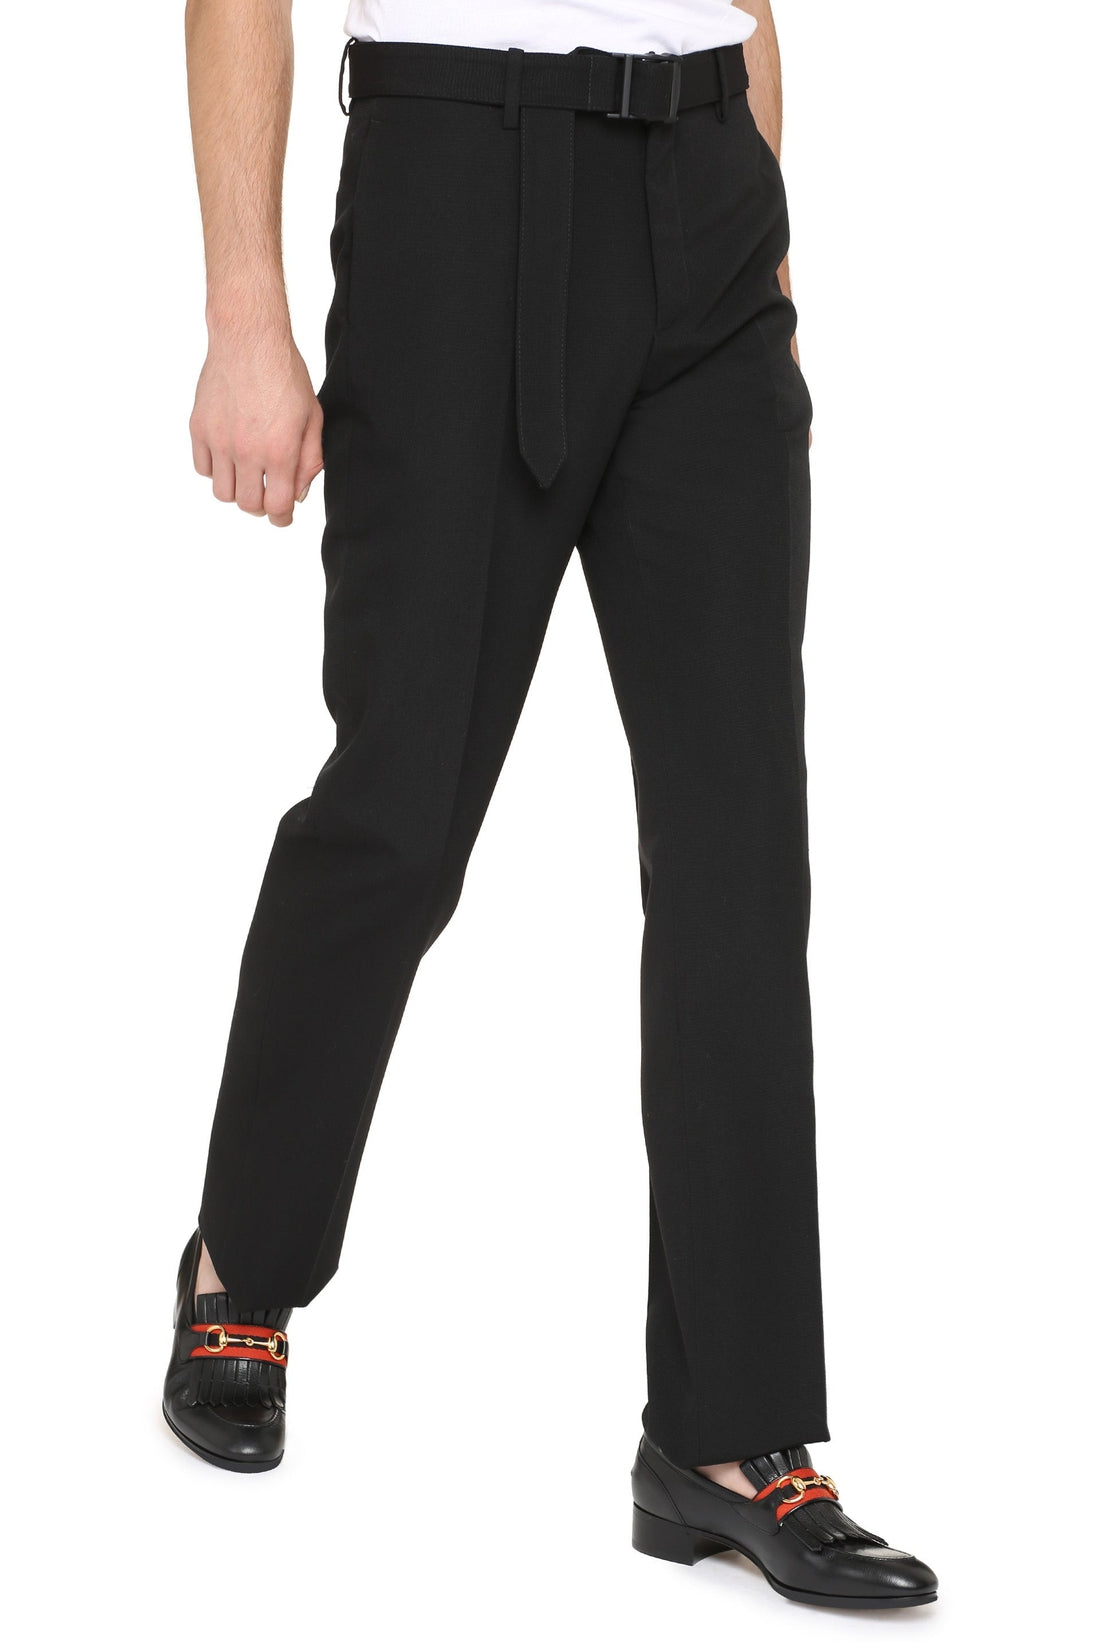 Off-White-OUTLET-SALE-Slim virgin-wool trousers-ARCHIVIST